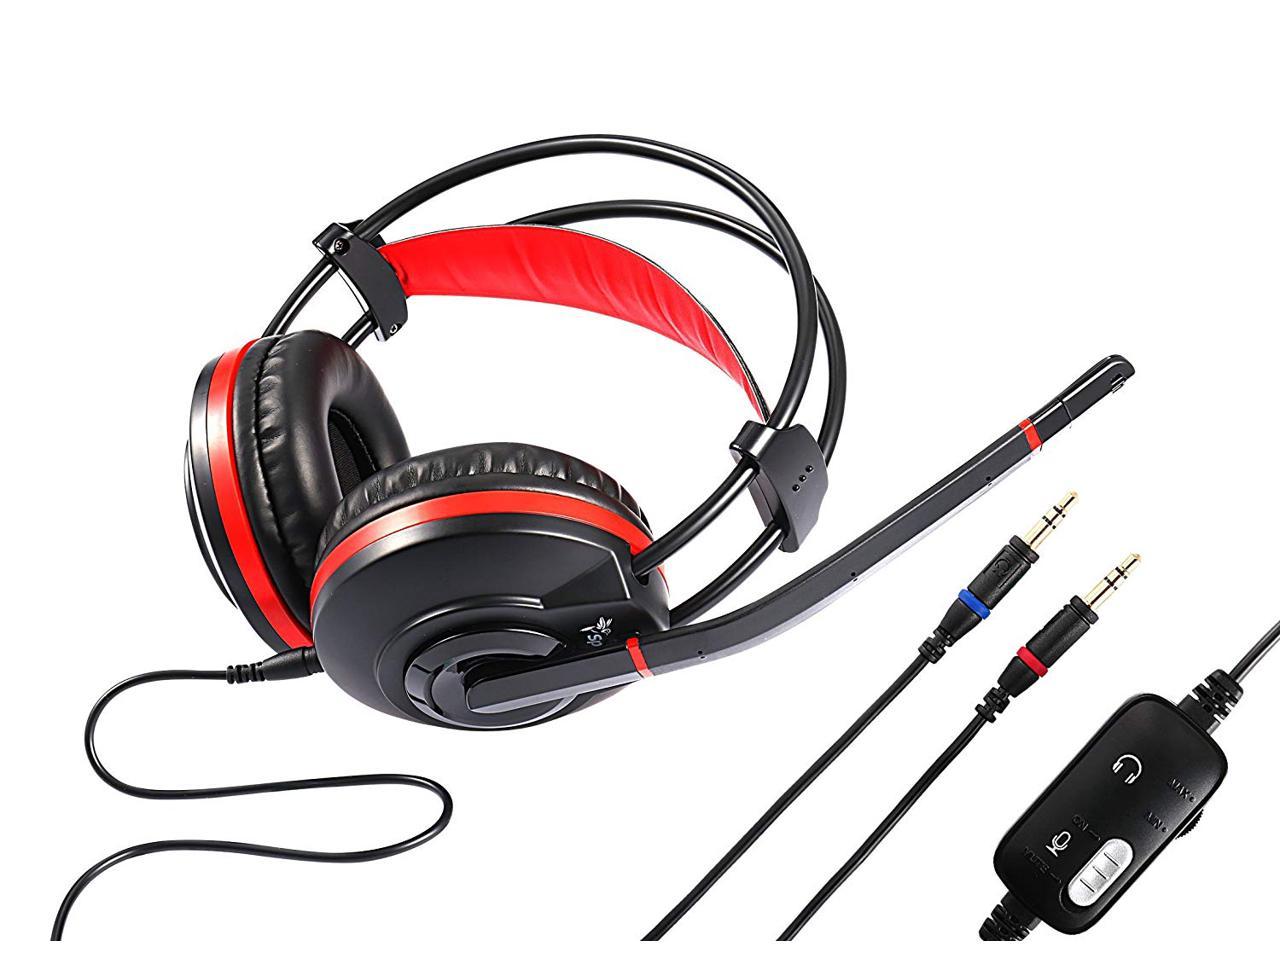 Spadger CD-440 Over-Ear Headset - NC Microphone, In-line Controller